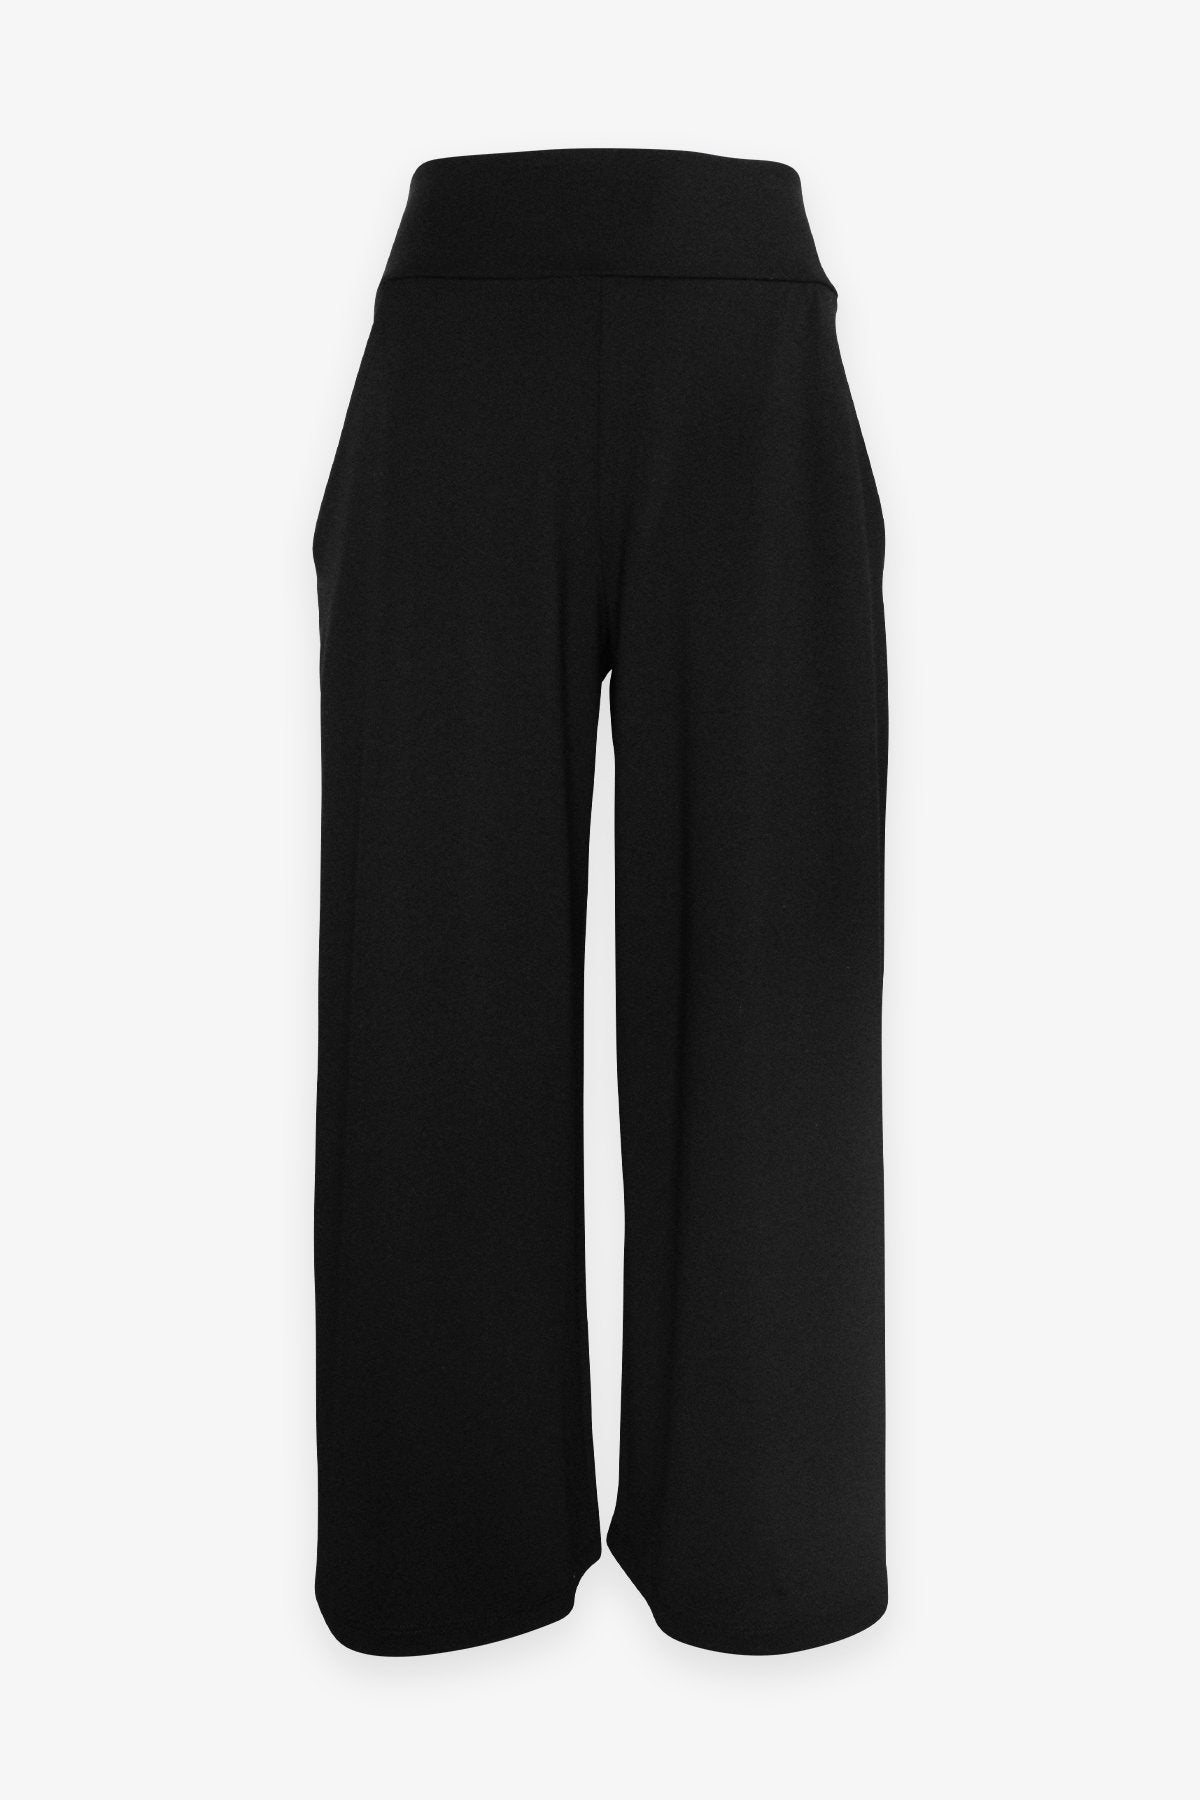 High Waist Relaxed Pocket Pant in Black - shop-olivia.com